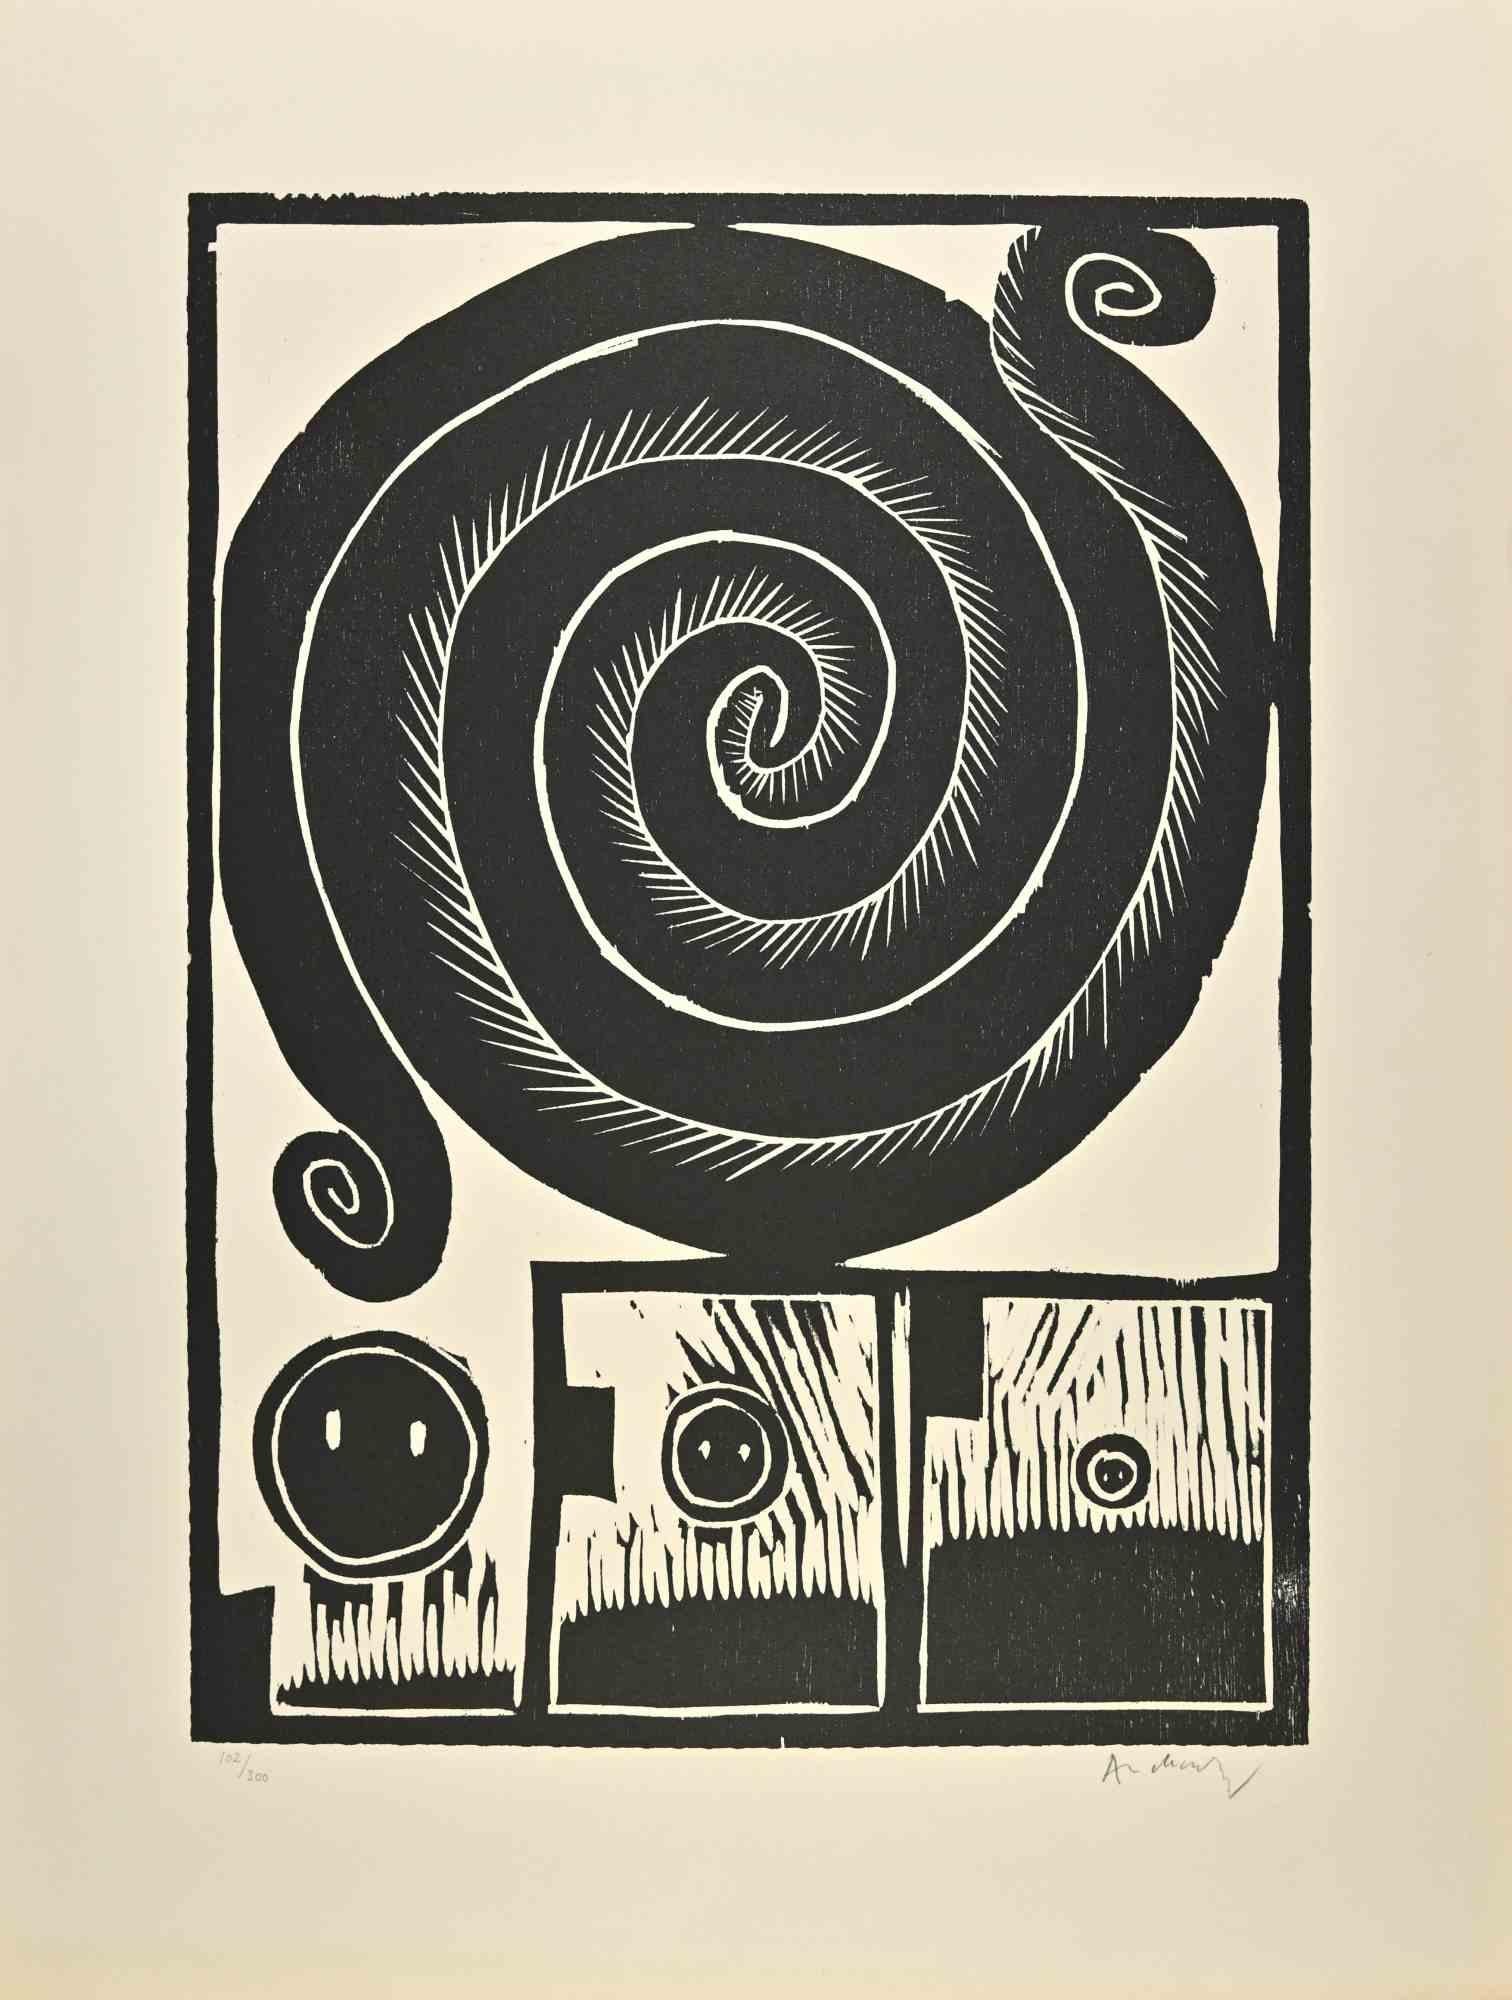 Untitled is an Woodcut print realized by Pierre Alechinsky in 1970.

Hand signed on the right margin and numbered on the left corner es. 102/300

The artwork is depicted through strong strokes in a well-balanced composition.

Good